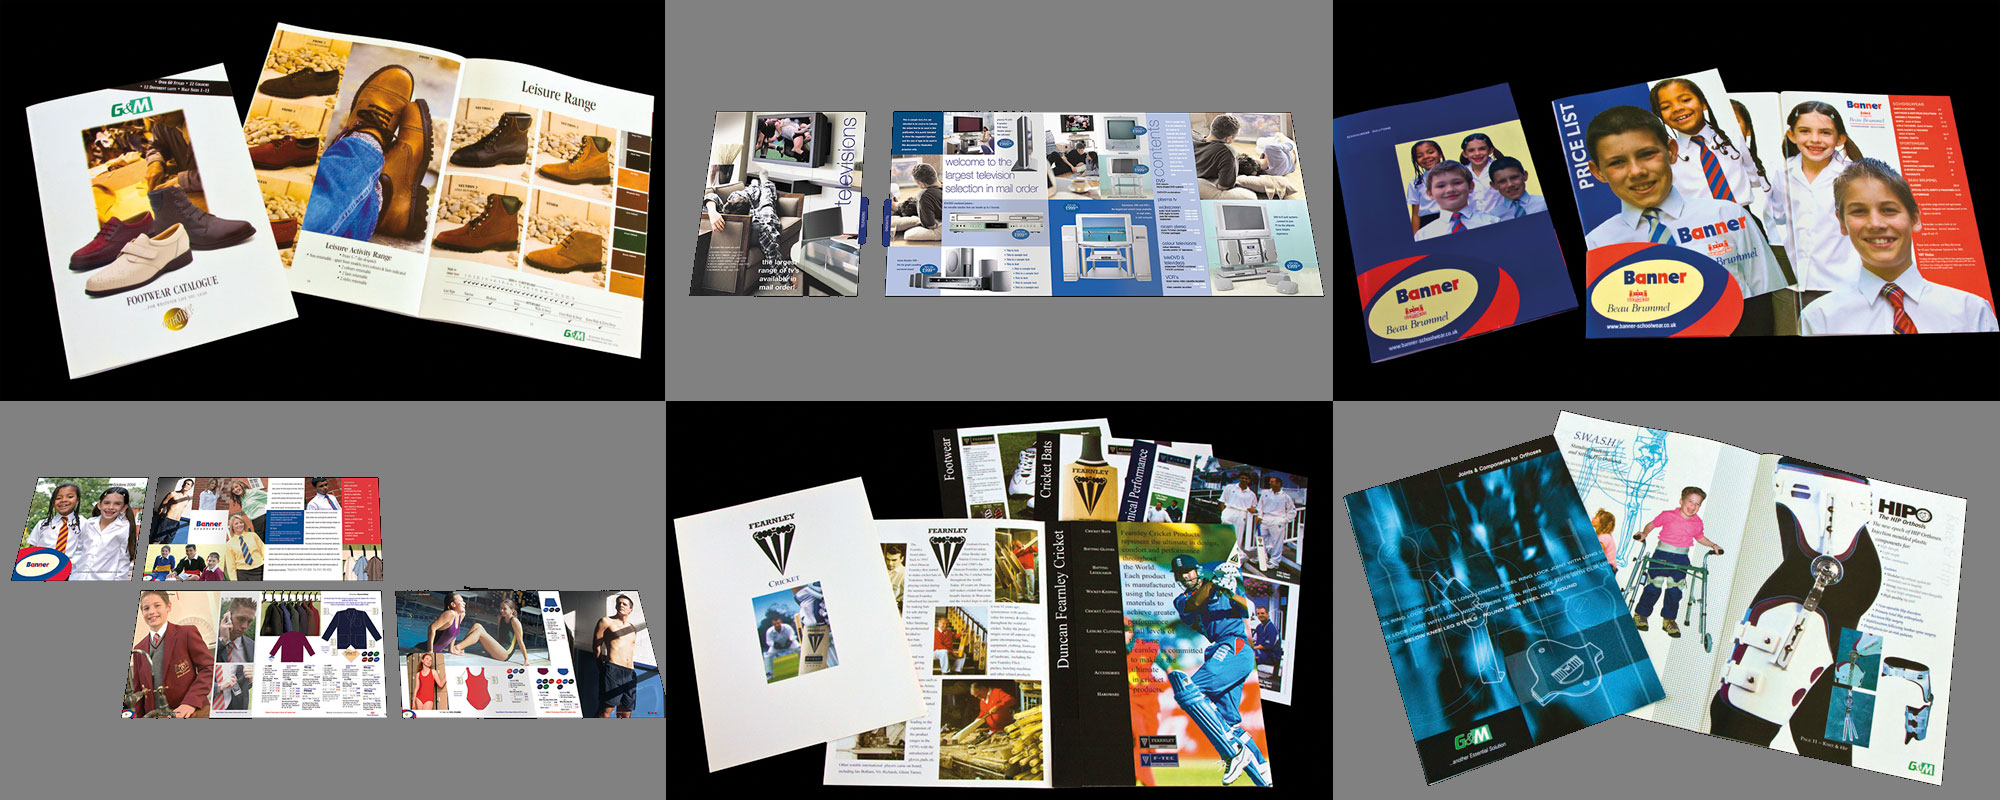 A selection of catalogues designed by Richard Blunt & Associates, specialist in design for print - experienced, creative, independent, autonomous, freelance graphic design consultancy in Hall Green, Birmingham, West Midlands © RichardBlunt-design.co.uk